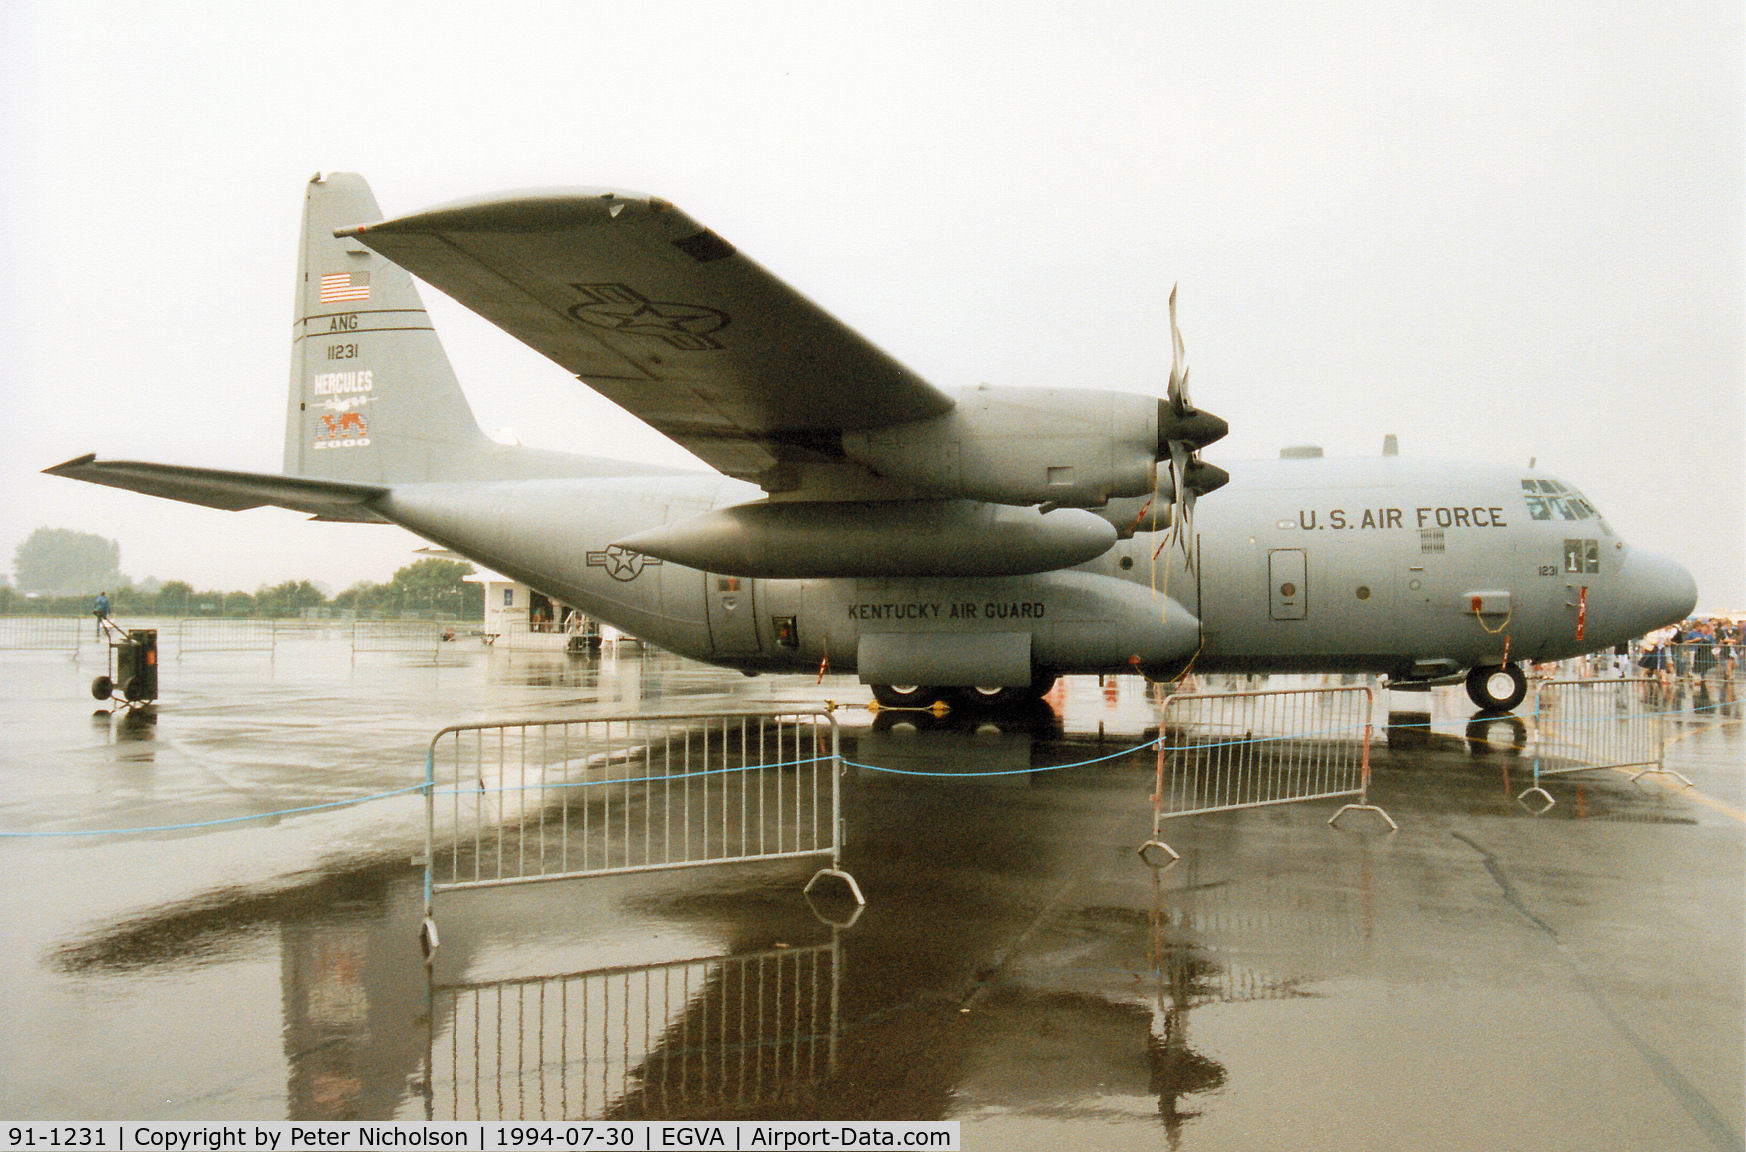 91-1231, 1992 Lockheed C-130H Hercules C/N 382-5278, C-130H Hercules, callsign Derby 94, of the Kentucky Air National Guard on display at the 1994 Intnl Air Tattoo at RAF Fairford.